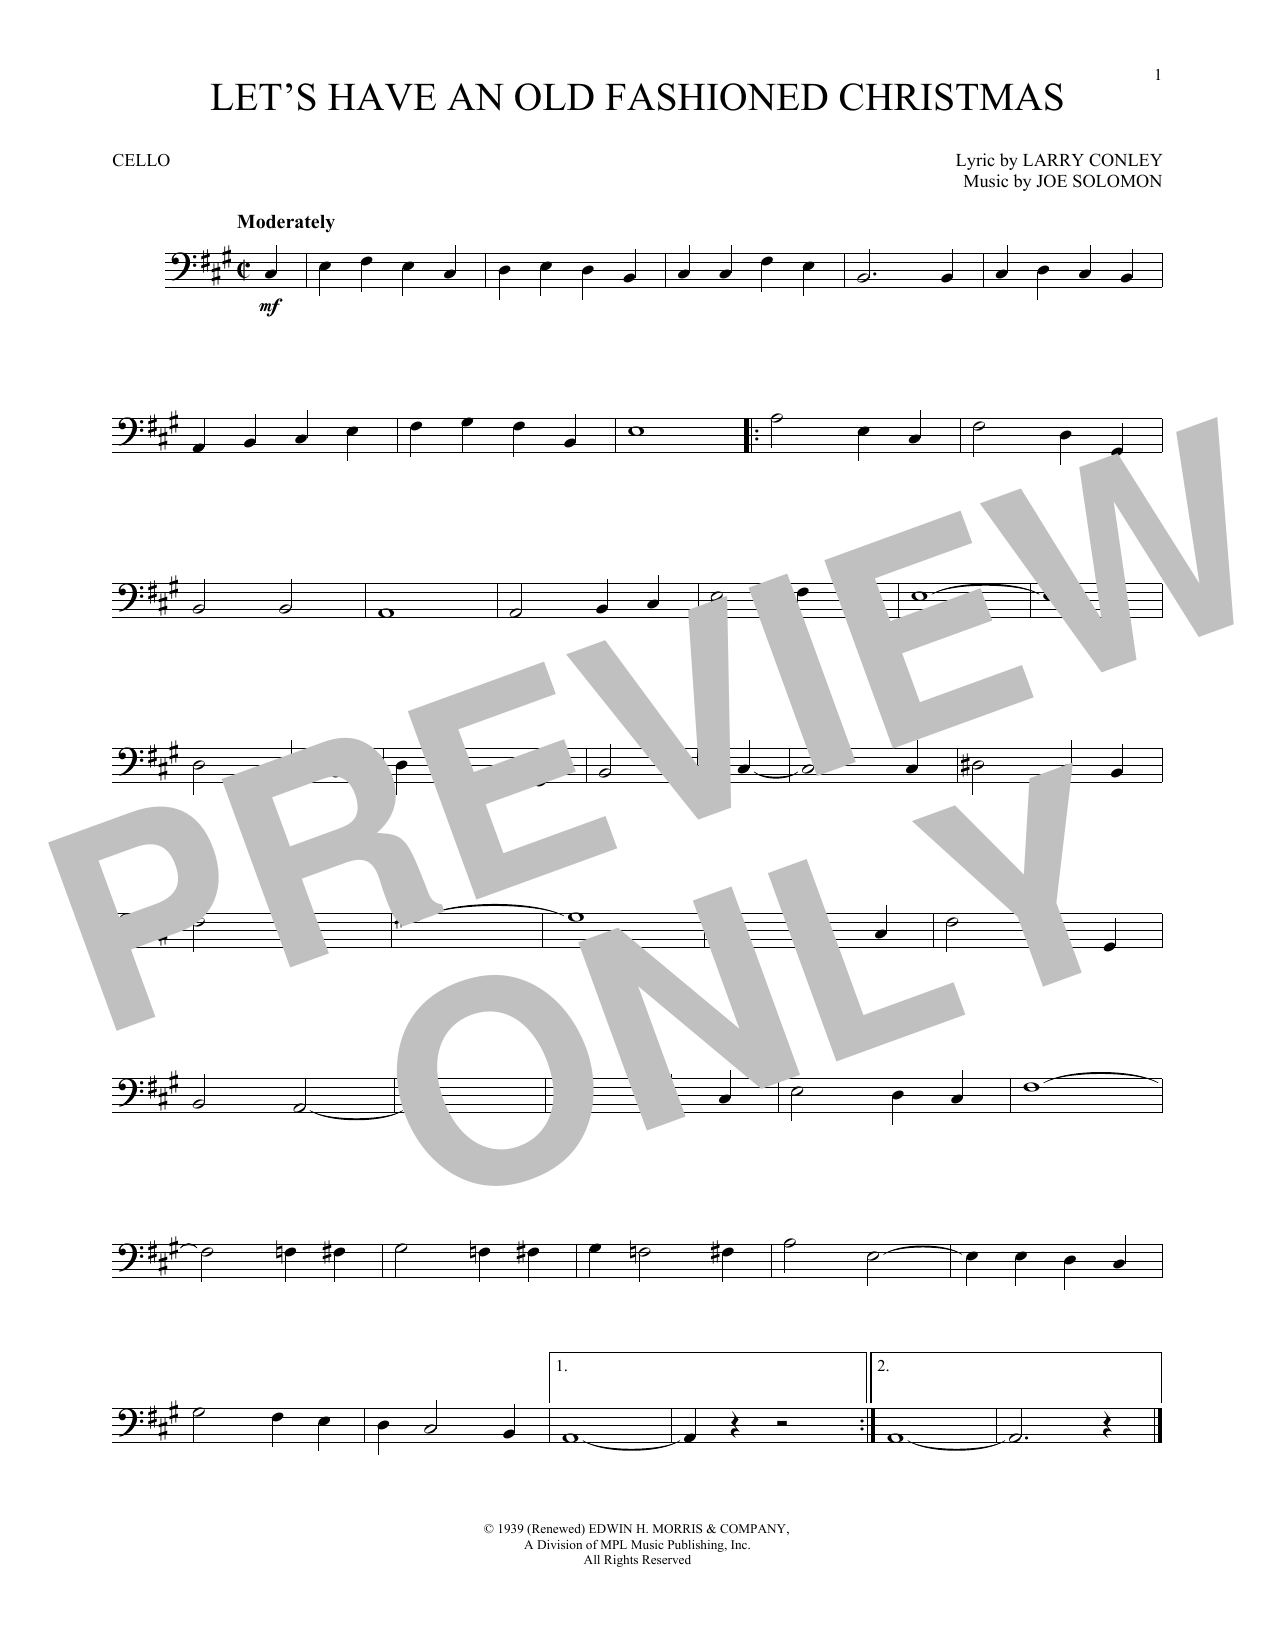 Joe Solomon Let's Have An Old Fashioned Christmas sheet music notes and chords. Download Printable PDF.